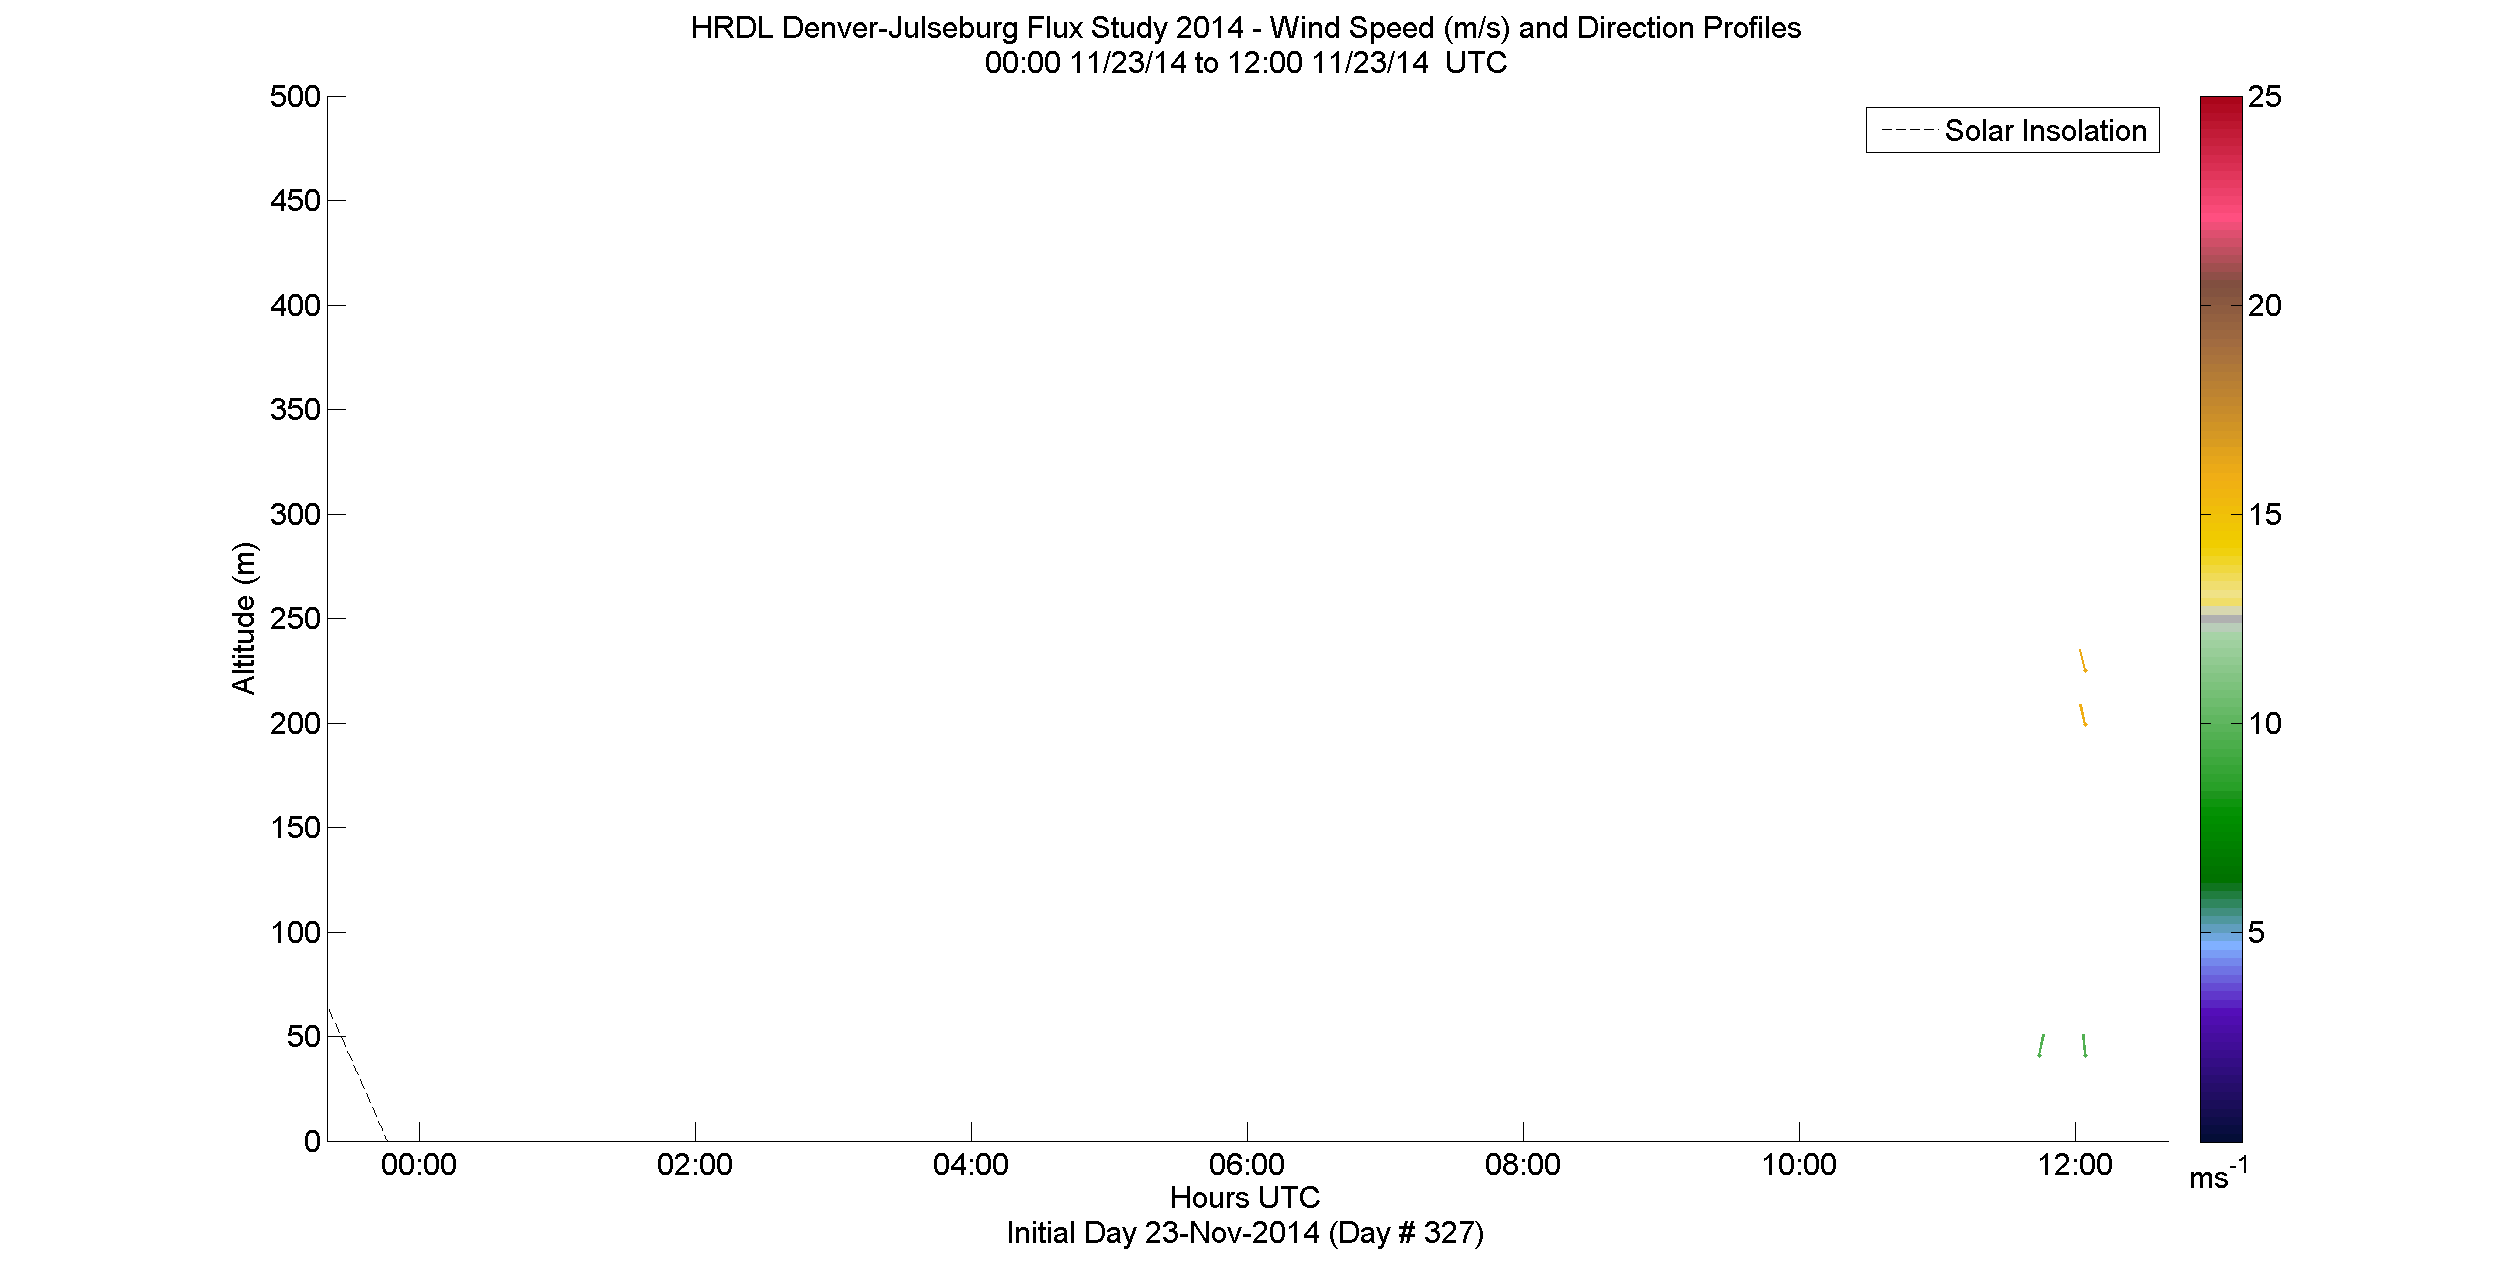 HRDL speed and direction profile - November 23 am